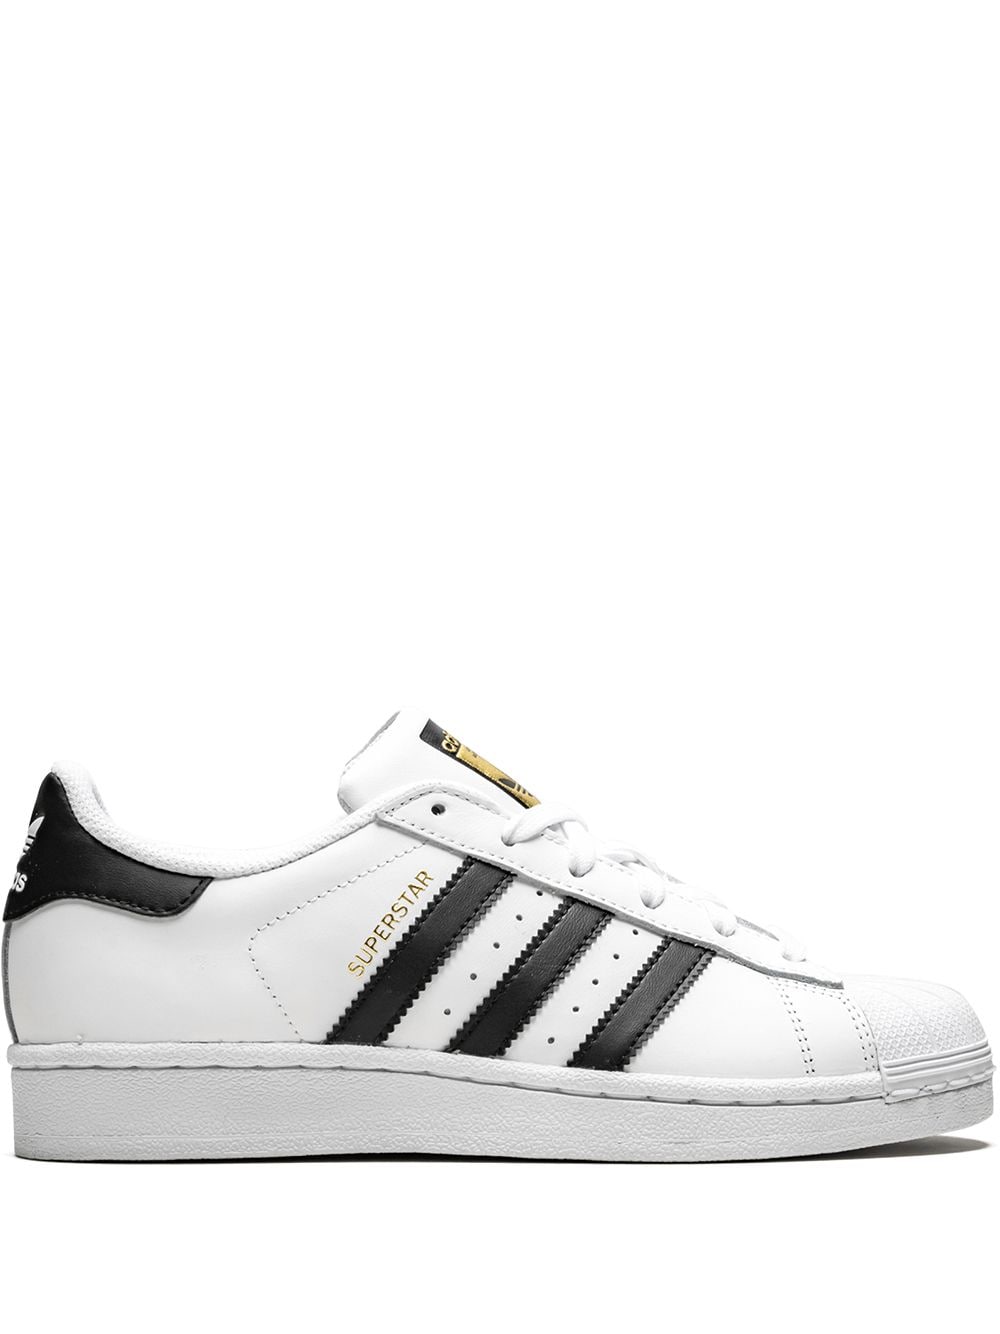 Image 1 of adidas Superstar J "White" sneakers